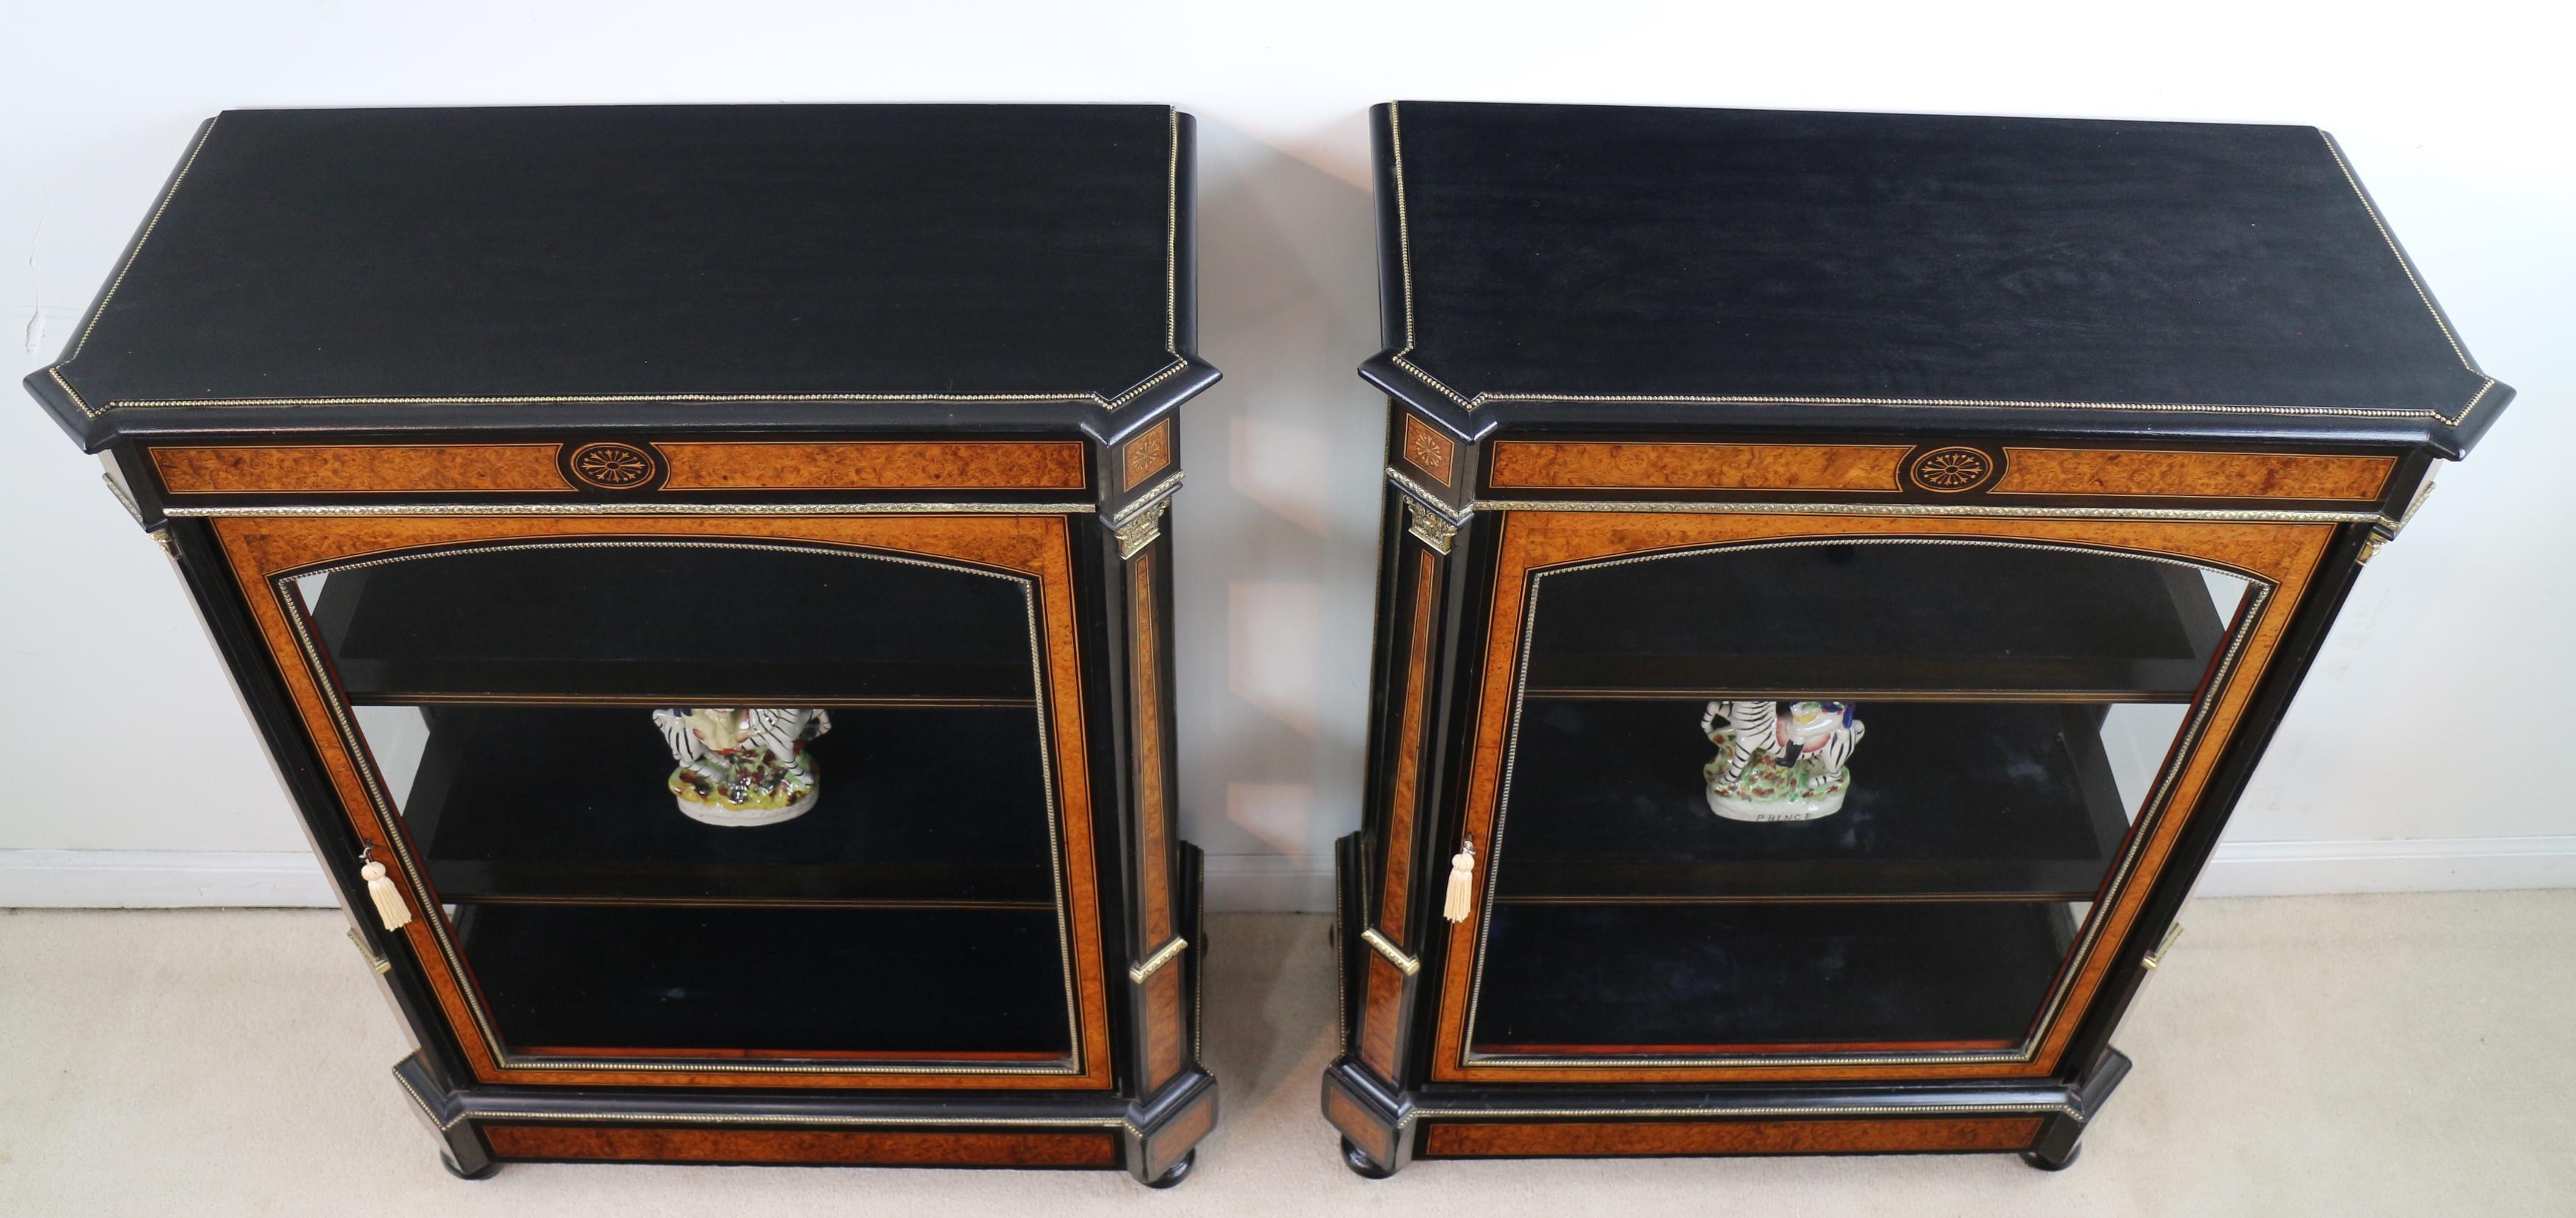 Brass Pair of Victorian Gilt Metal Mounted, Ebonised & Amboyna Pier Display Cabinets